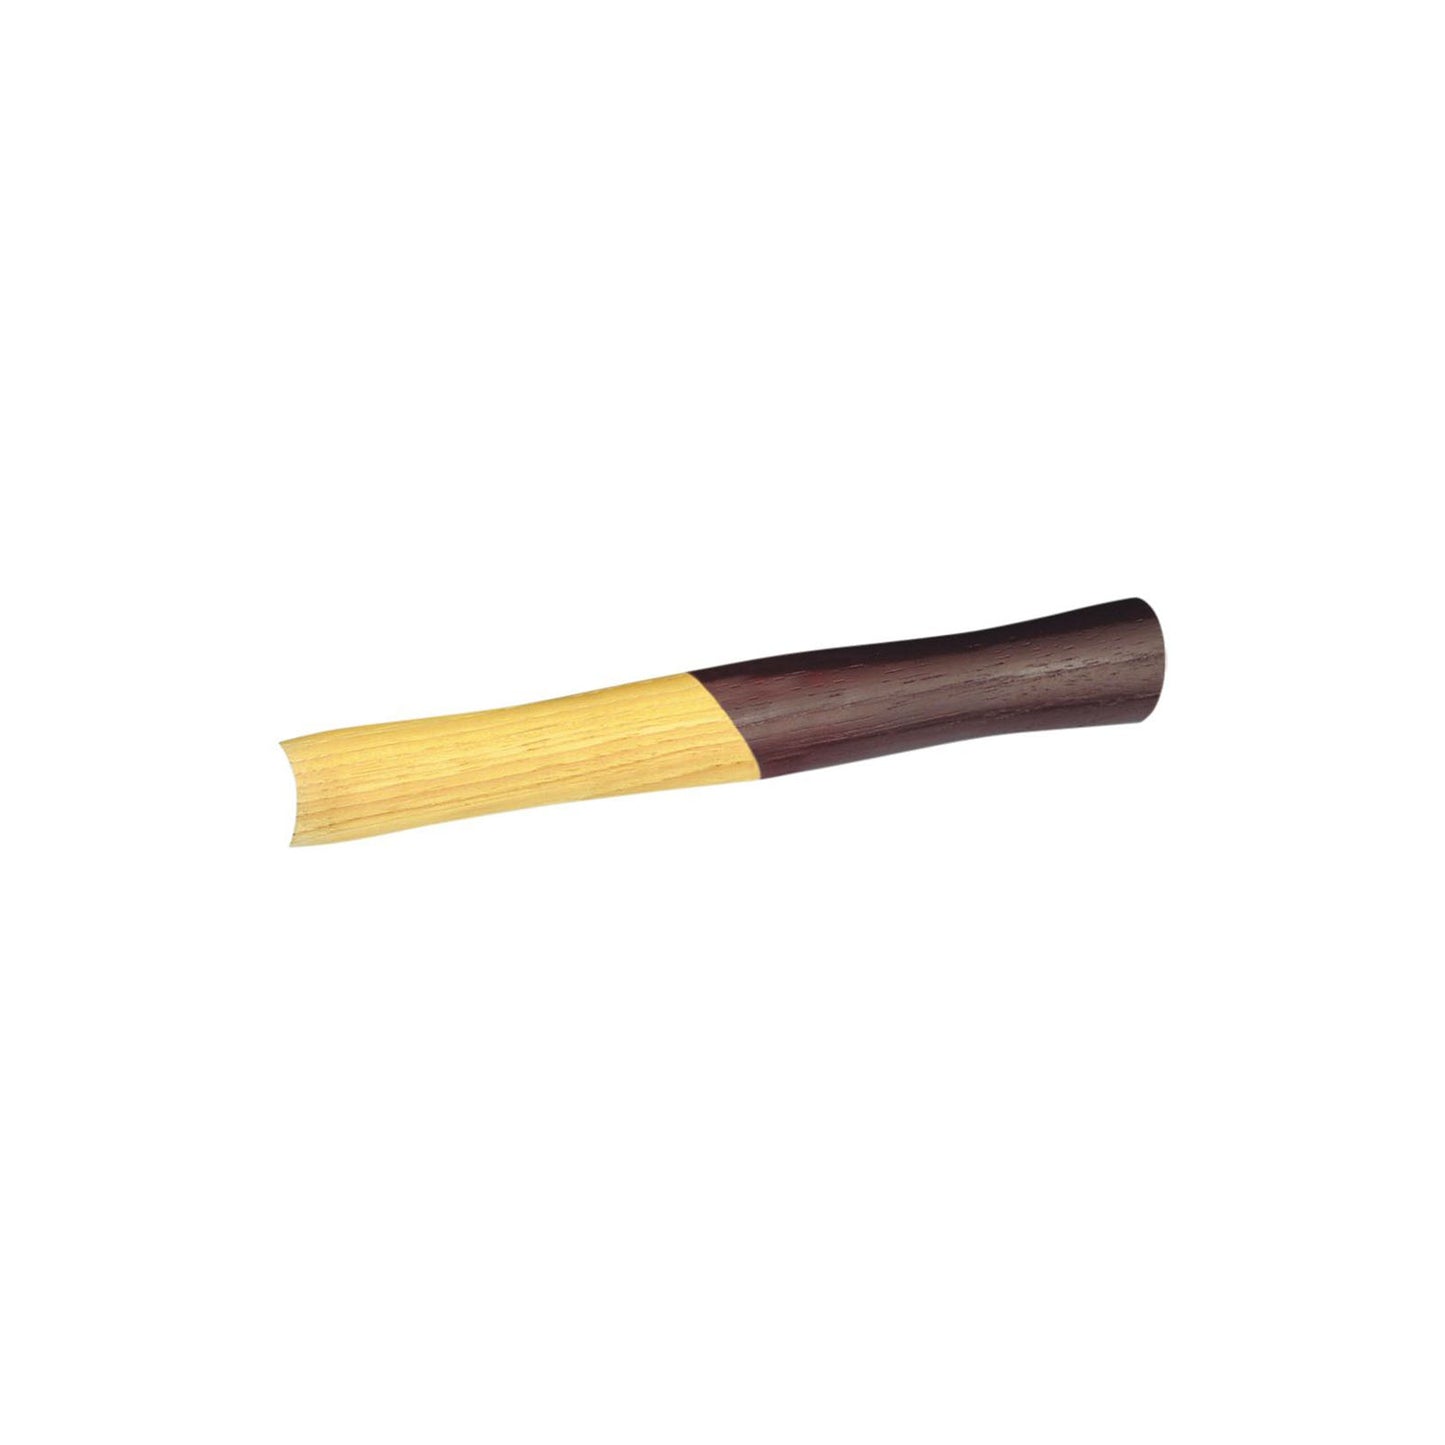 GEDORE E 248 H-60-70 - Walnut replacement handle 31cm (8740000)